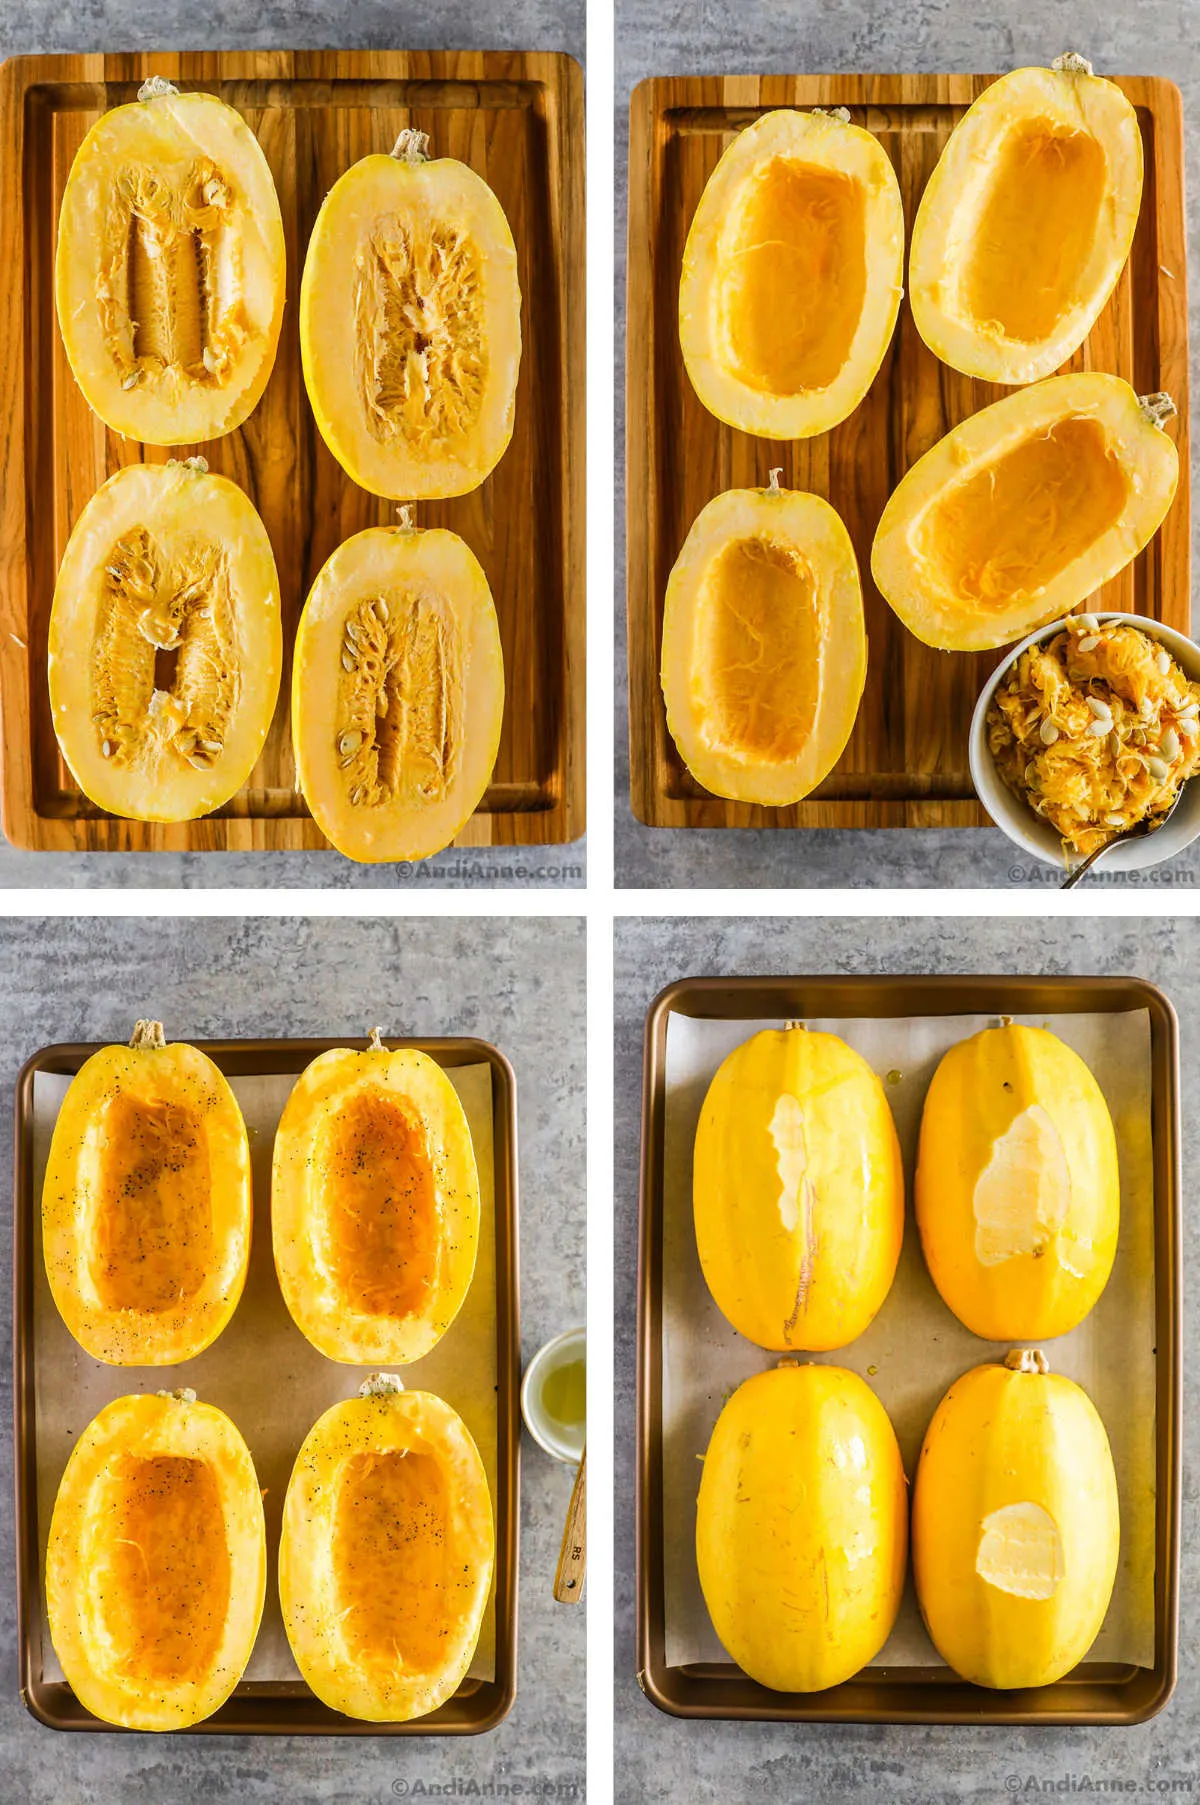 Four overhead images in one: 1. Four halves of two squash resting on a wooden cutting board. 2. Four halves with seeds and strings scooped out and into a white bowl at bottom left. 3. Four squash halves placed on parchment paper on a baking sheet. Salt and pepper sprinkled on top. 4. Each squash half has been placed face down. 